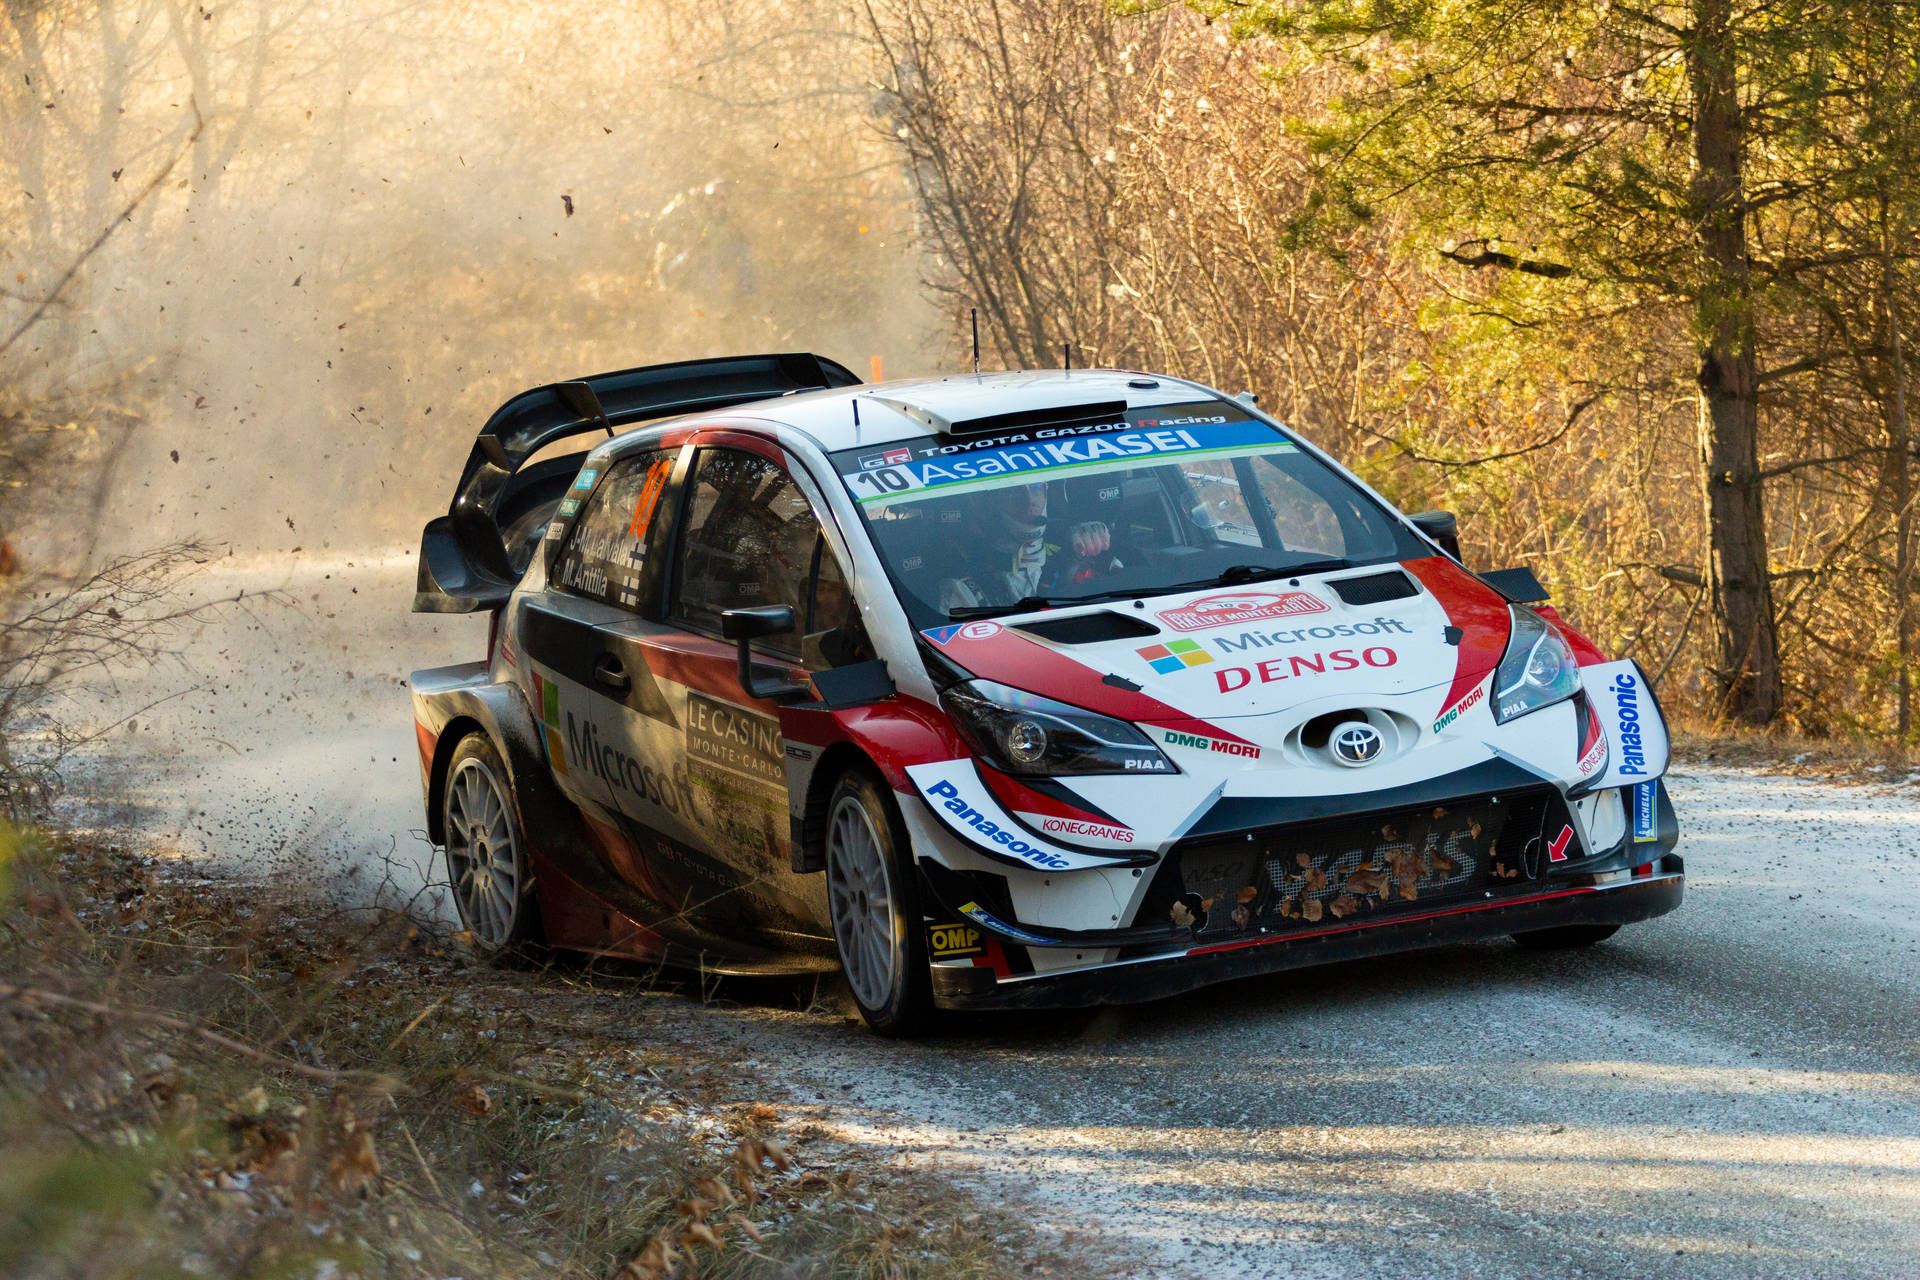 Thrilling Action on Track - Dirt Rally Toyota Yaris Wallpaper